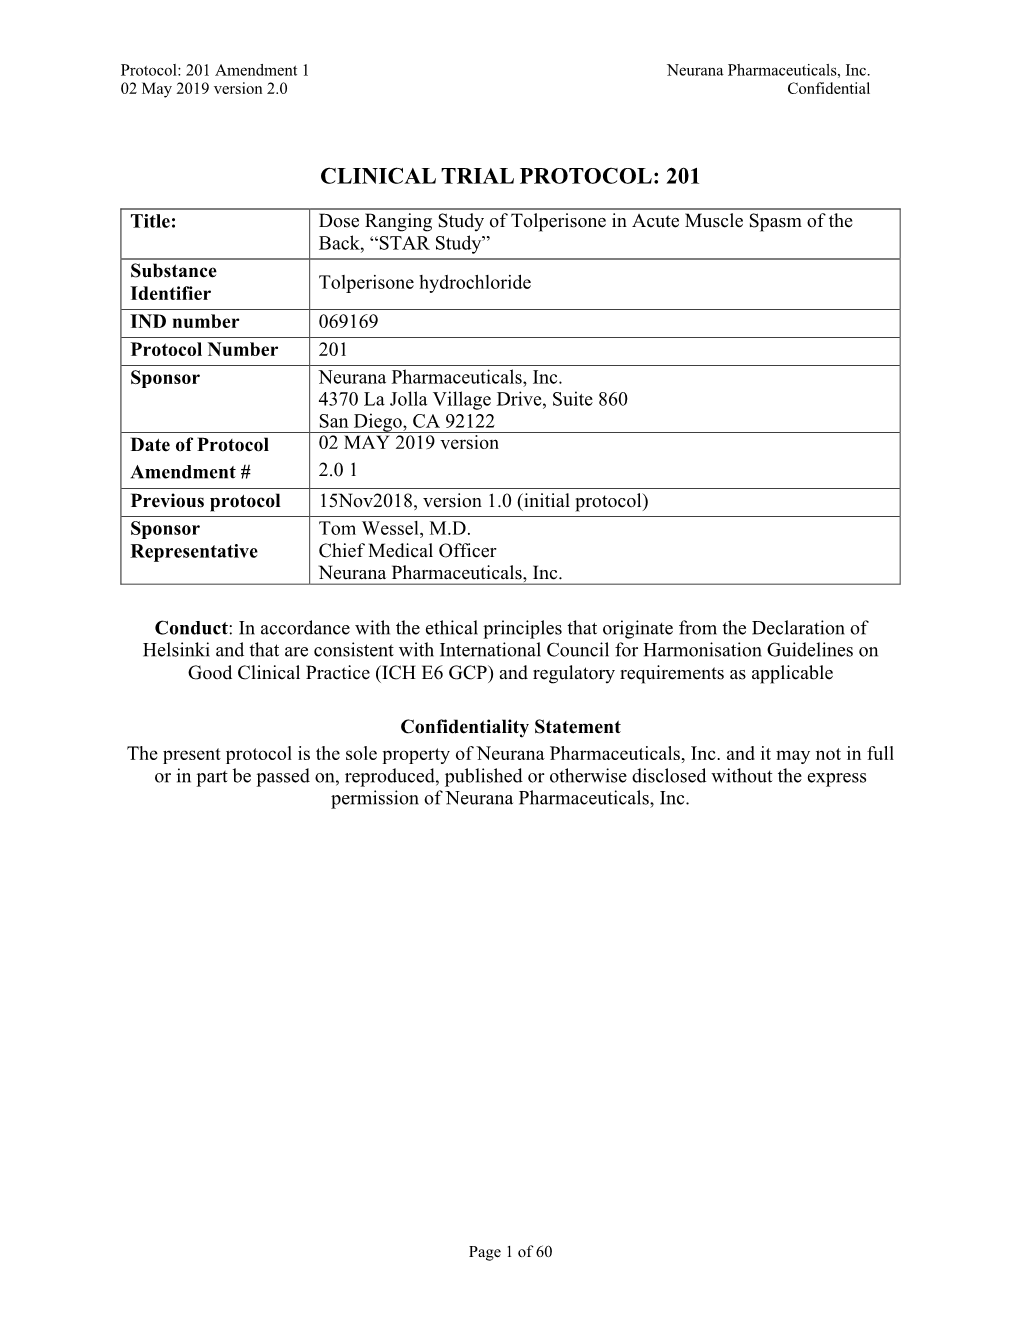 Clinical Trial Protocol: 201